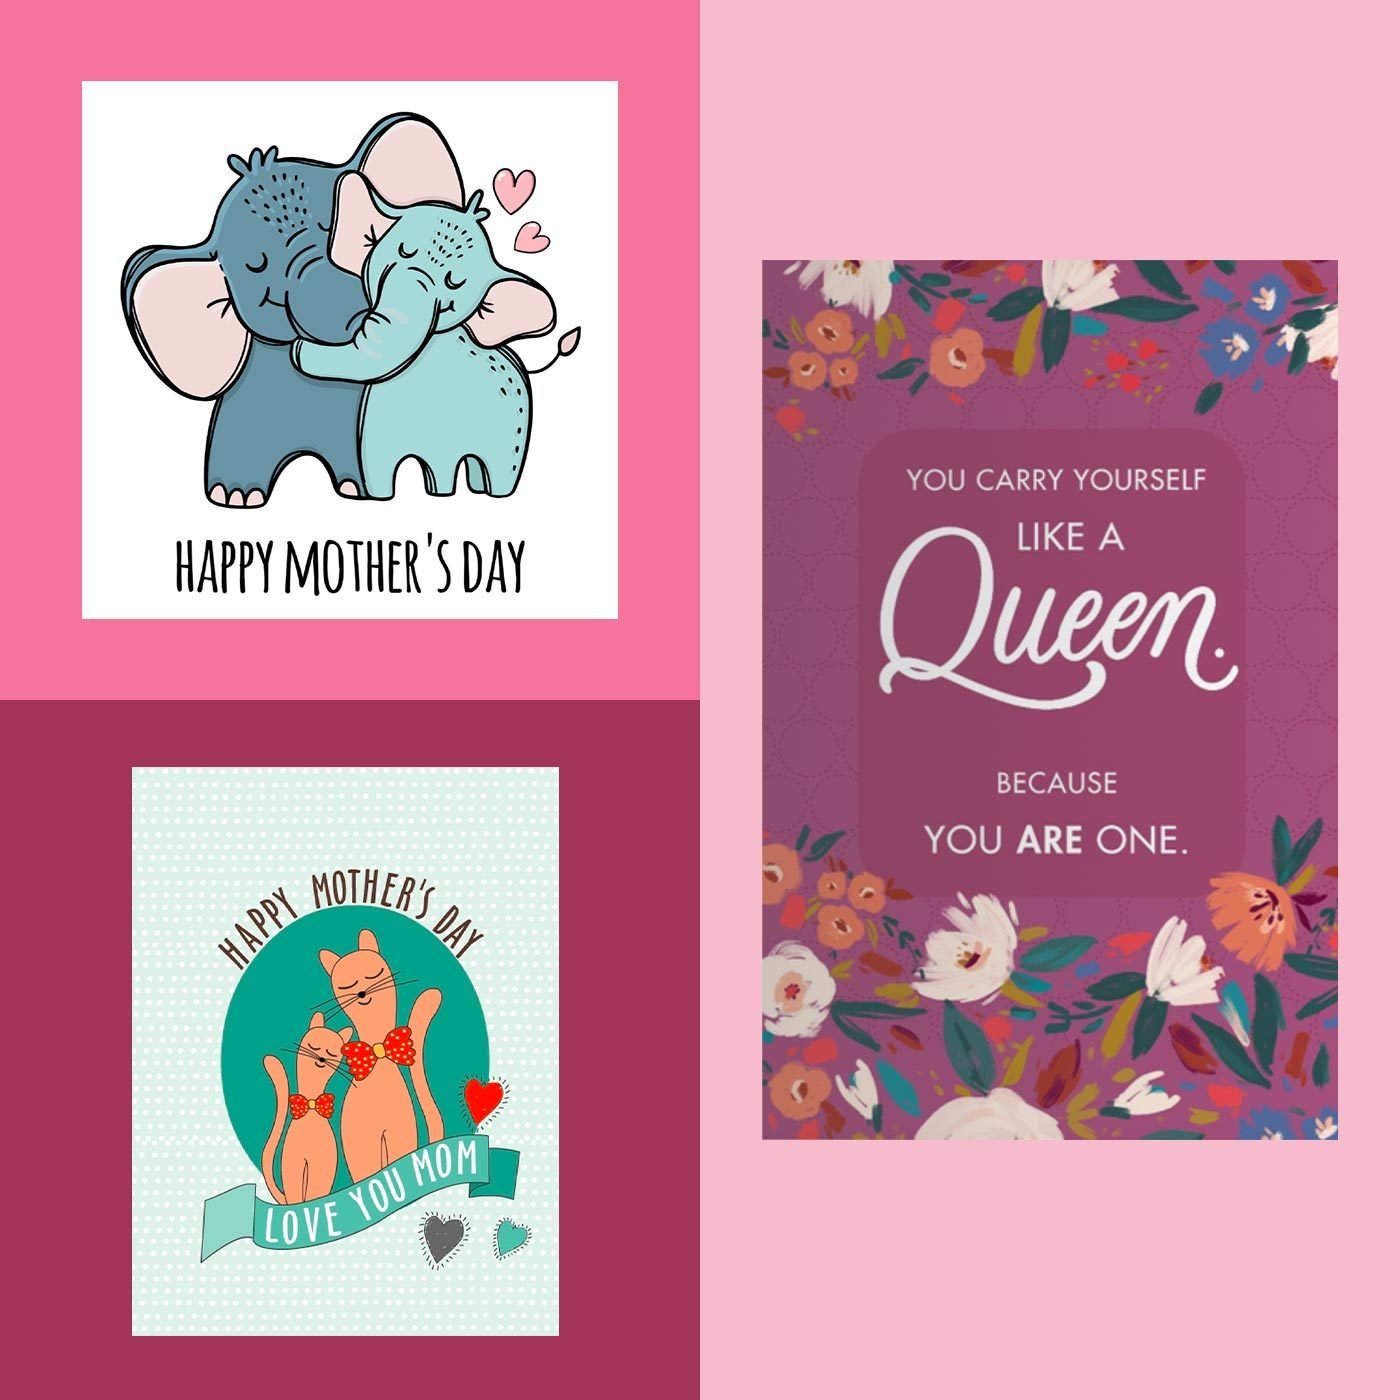 https://www.rd.com/wp-content/uploads/2022/04/45-Free-Printable-Mothers-Day-Cards-That-Send-the-Perfect-Message_FT-1.jpg